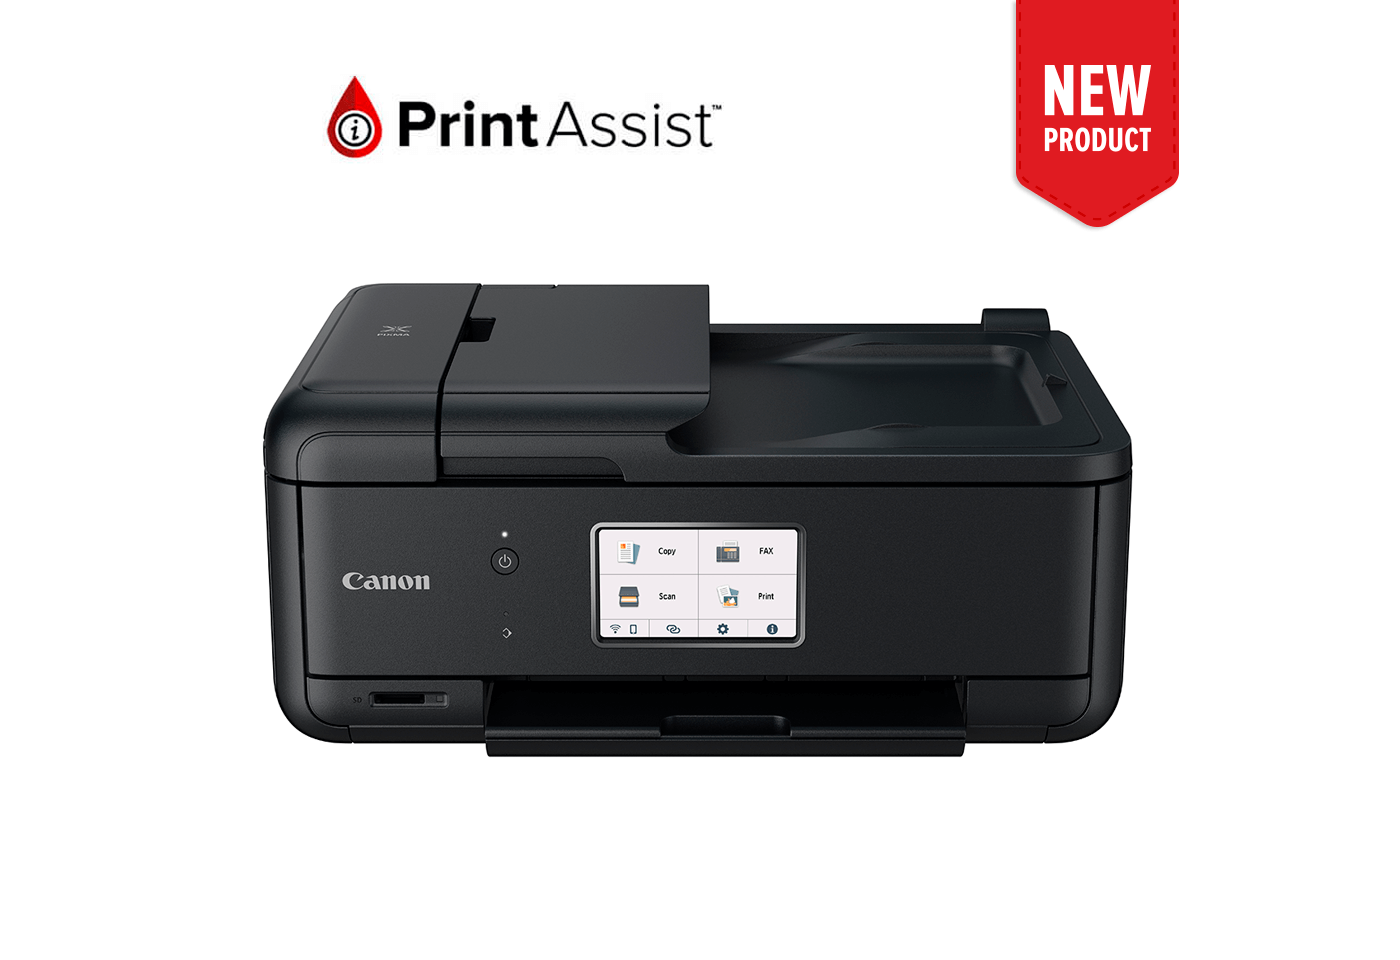 Product image of the new PIXMA HOME OFFICE TR8660 printer with Print Assist